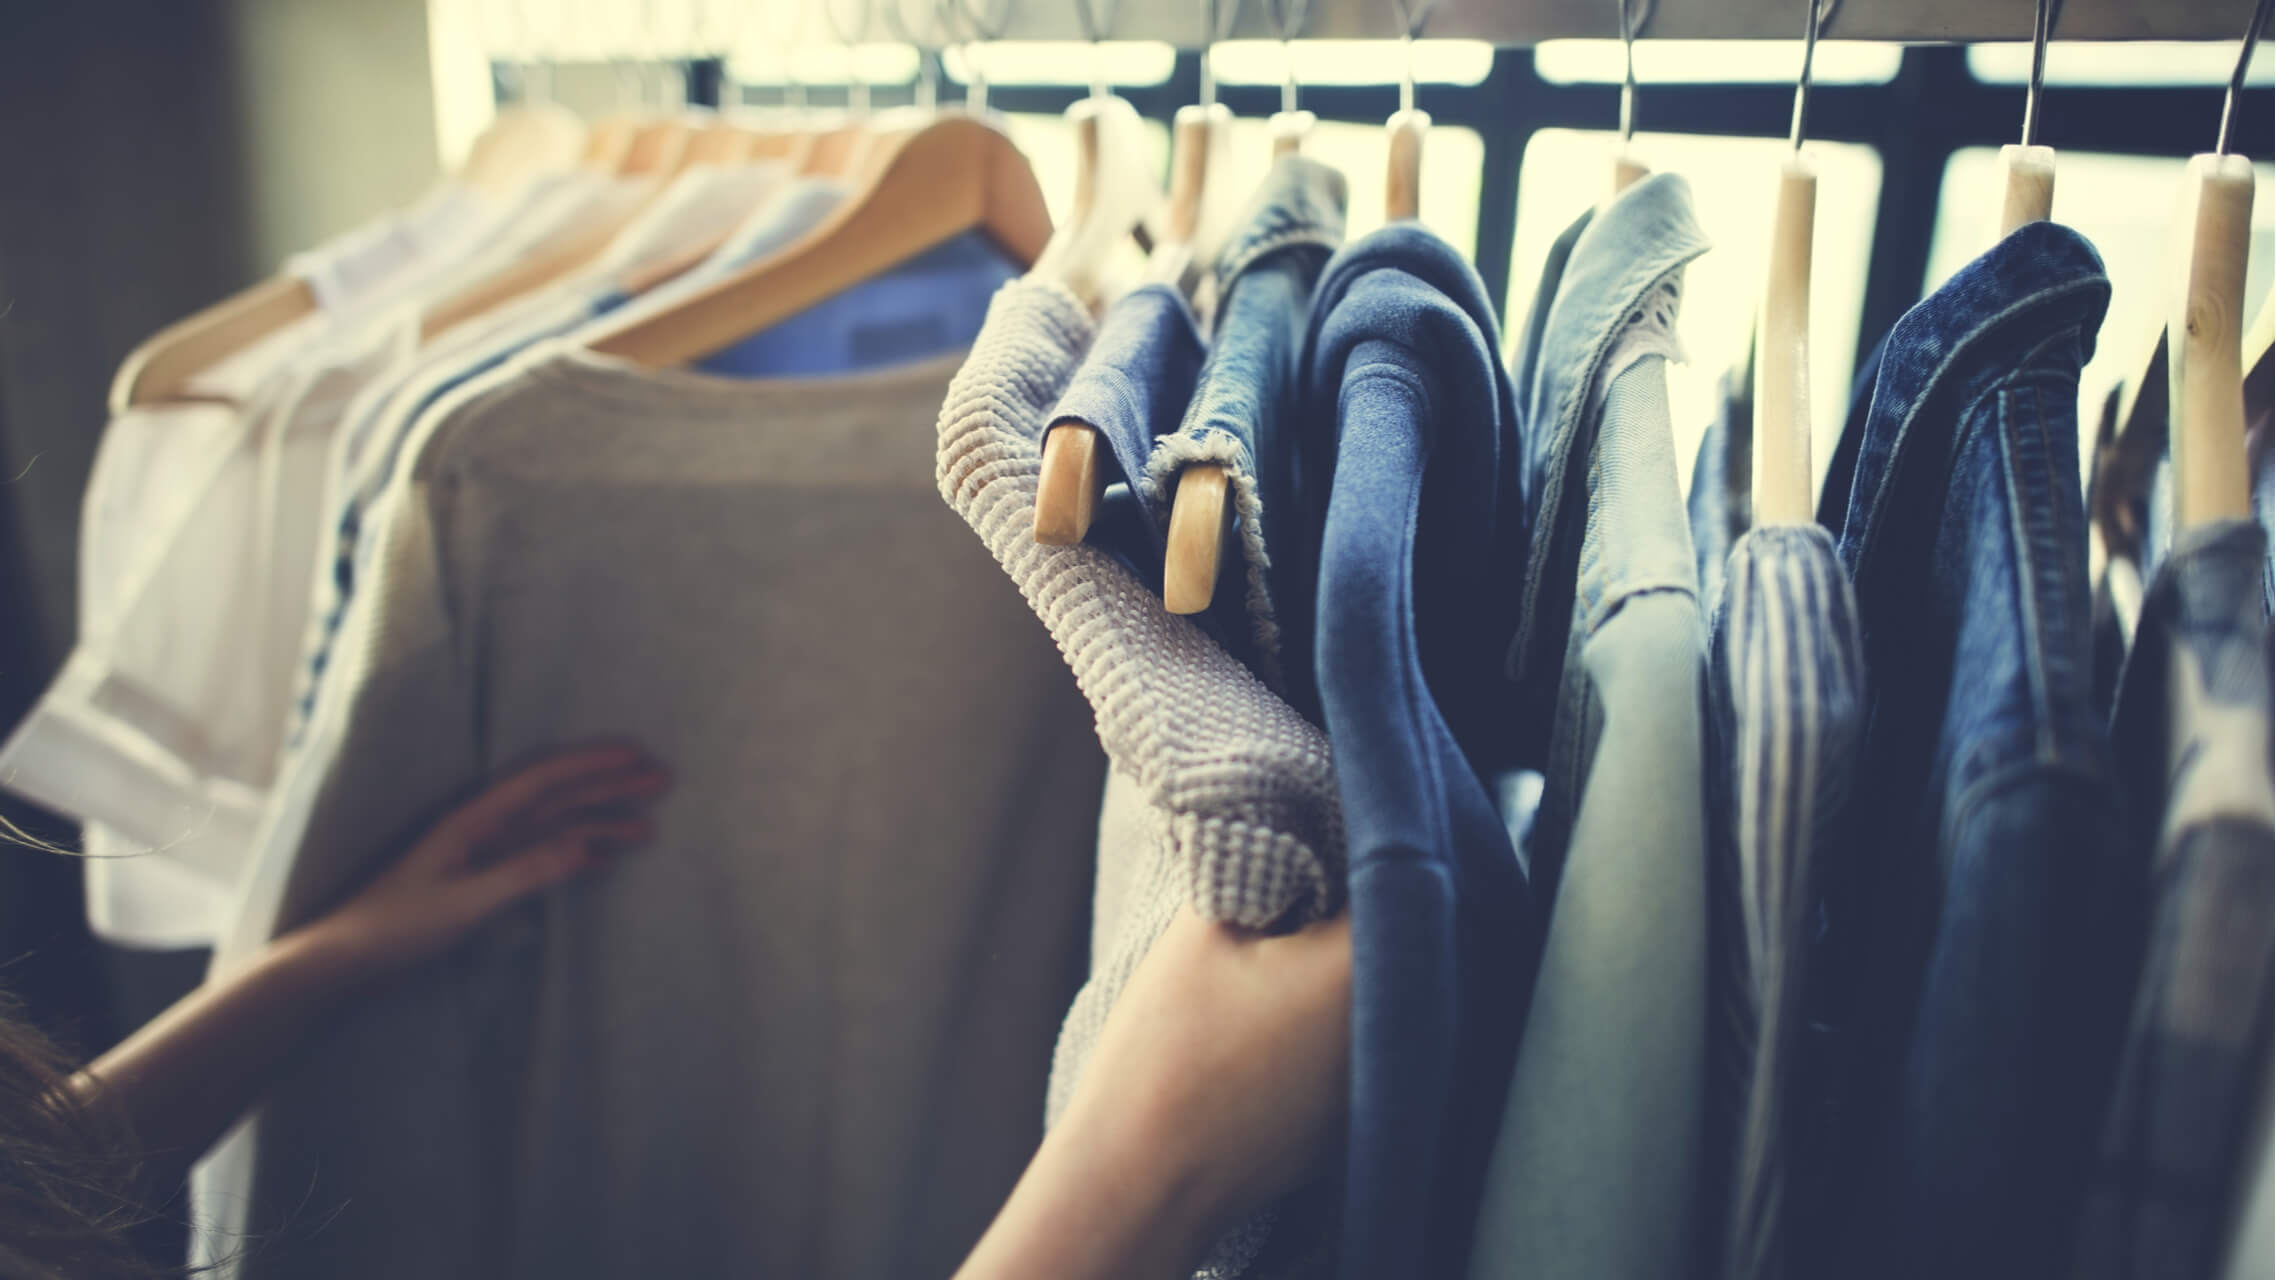 Do Apparel Brands' Customers Really Care About Ethical Sourcing? - SgT Group | Textile testing and analysis | Textile quality management solutions